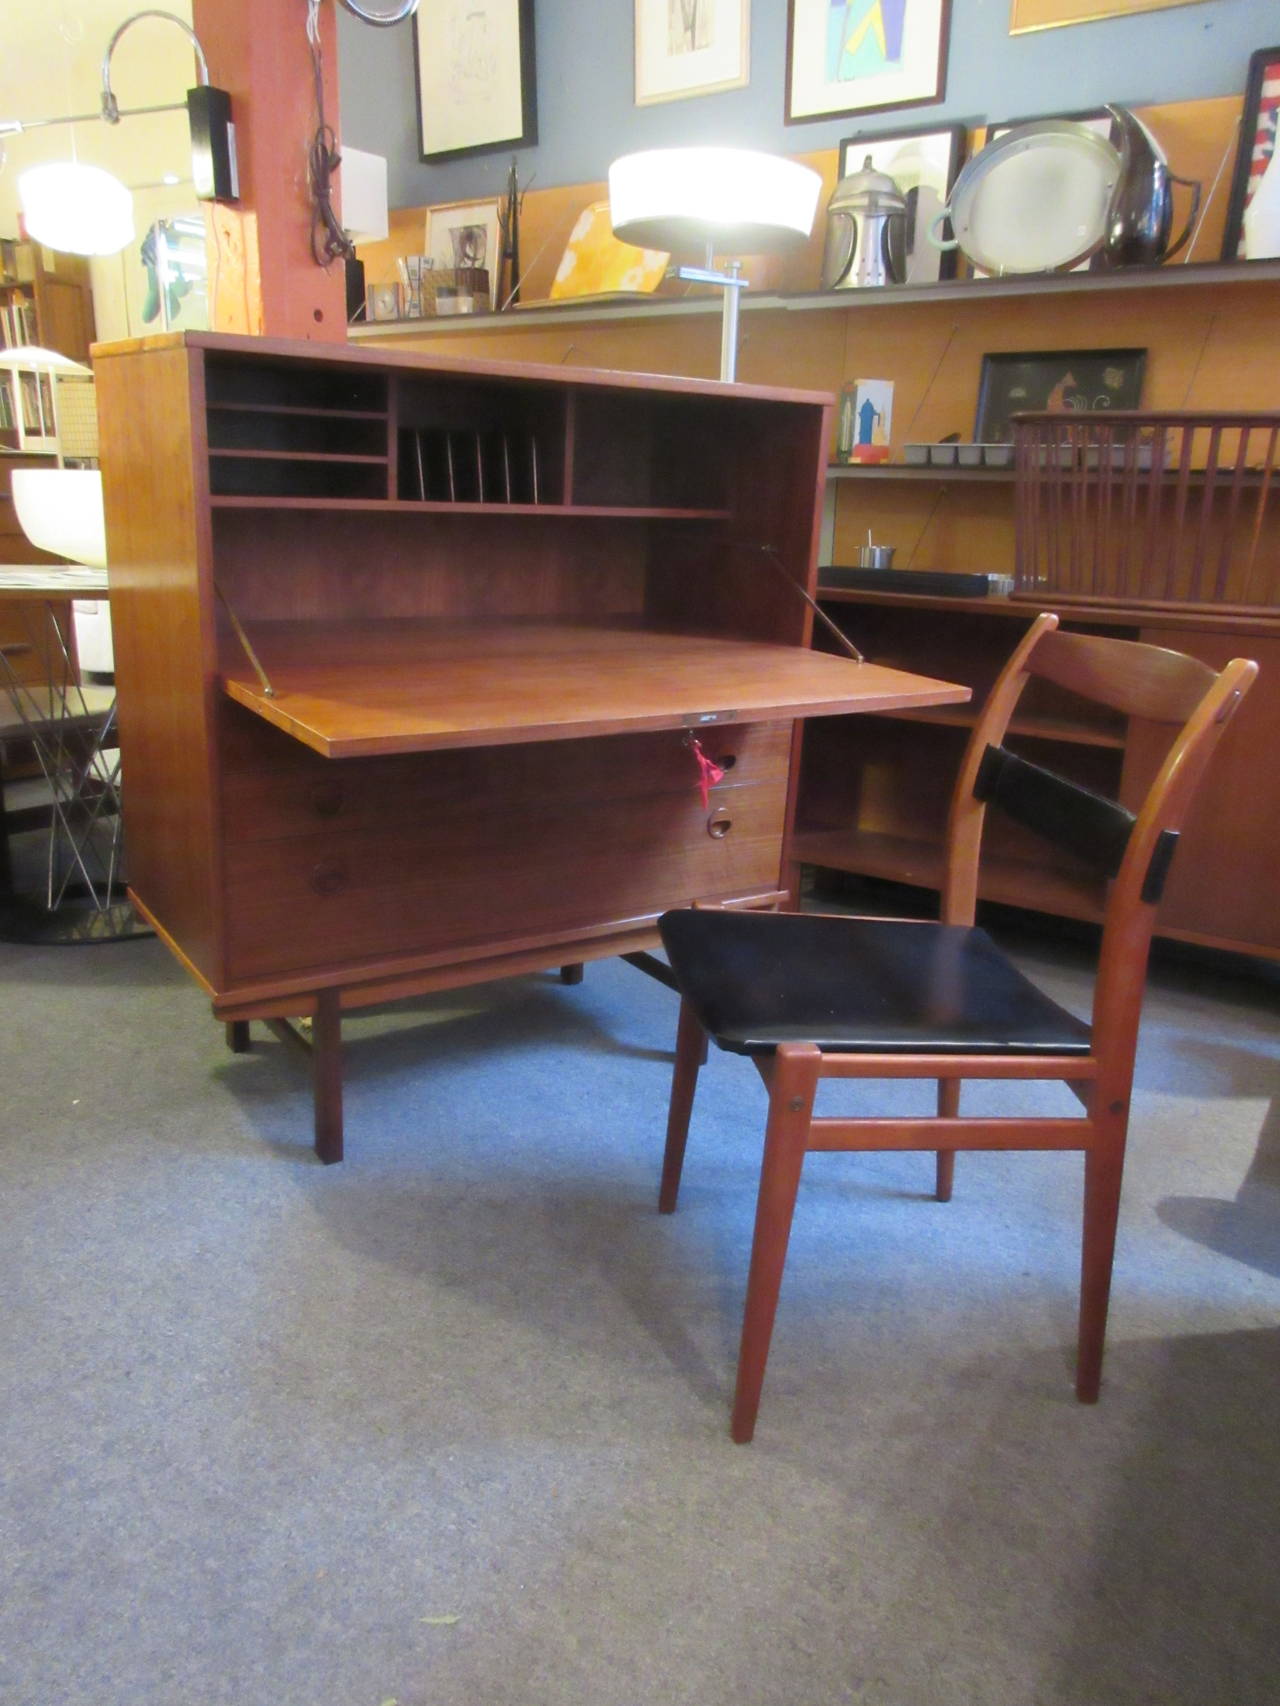 Teak drop-front desk with one large drawer and two smaller. Drop-front reveals cubbies and ample work surface. Refinished and ready to go! DUX chair is included with desk.